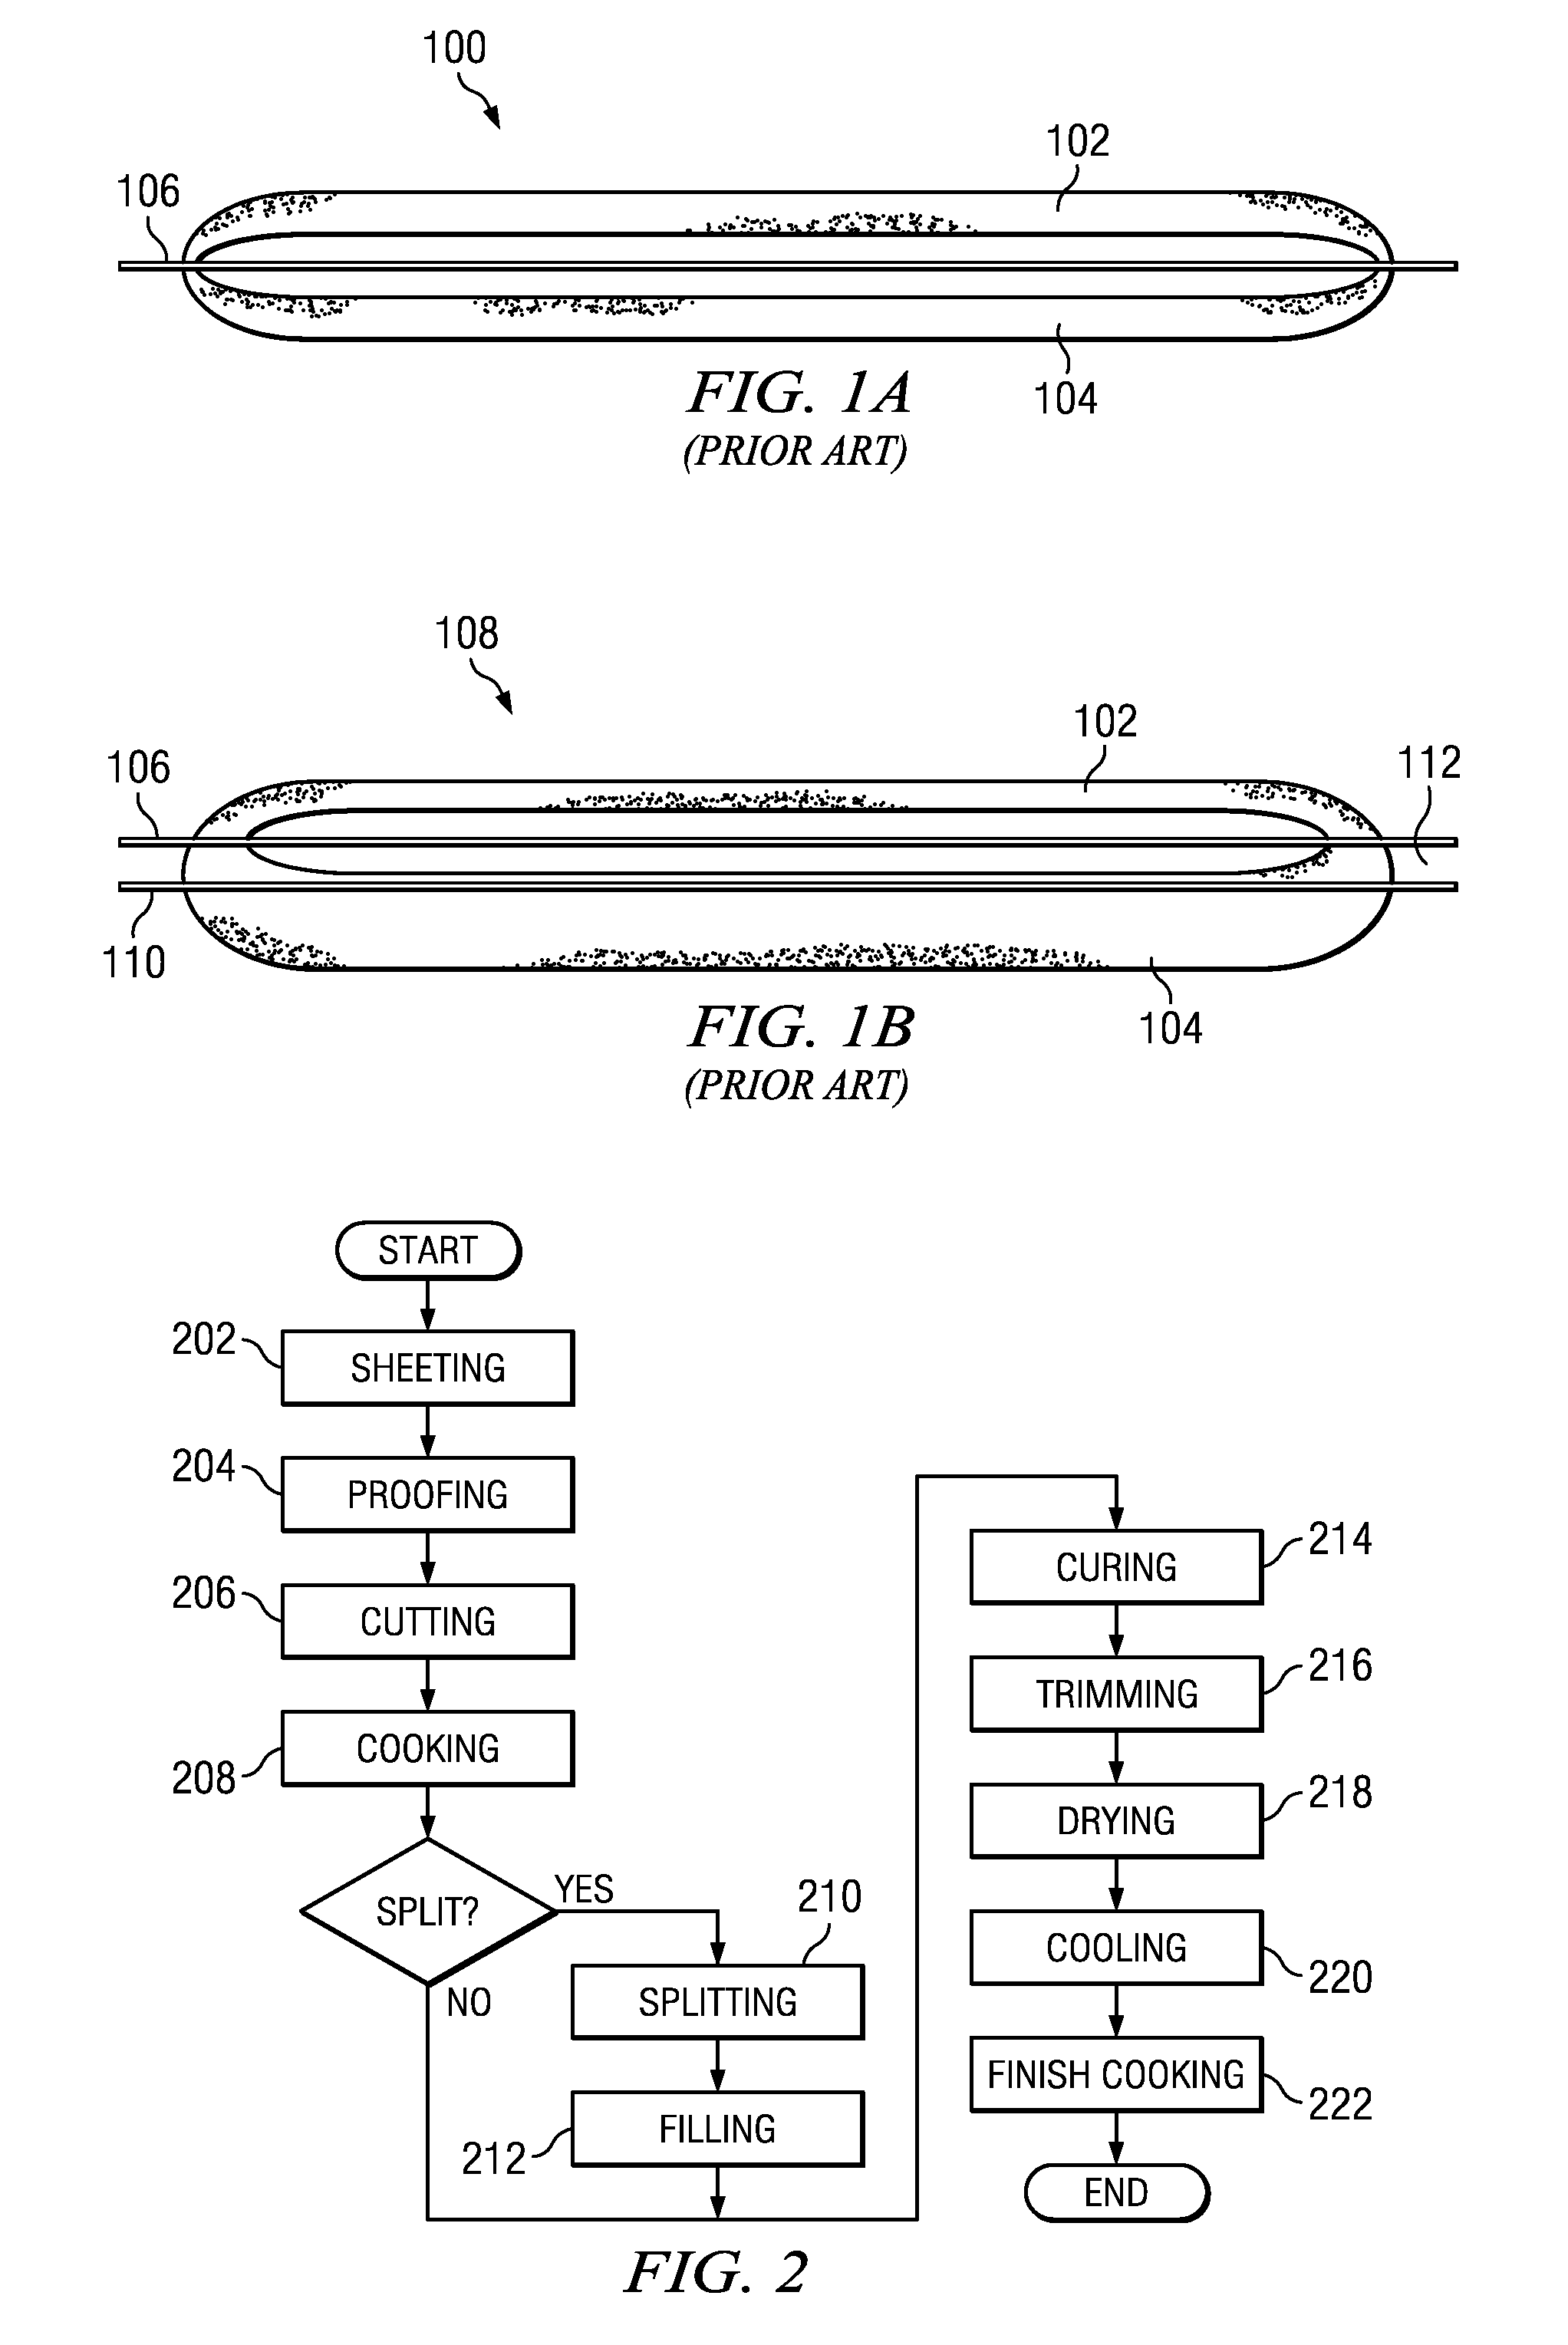 Continuous Process and Apparatus for Making a Pita Chip